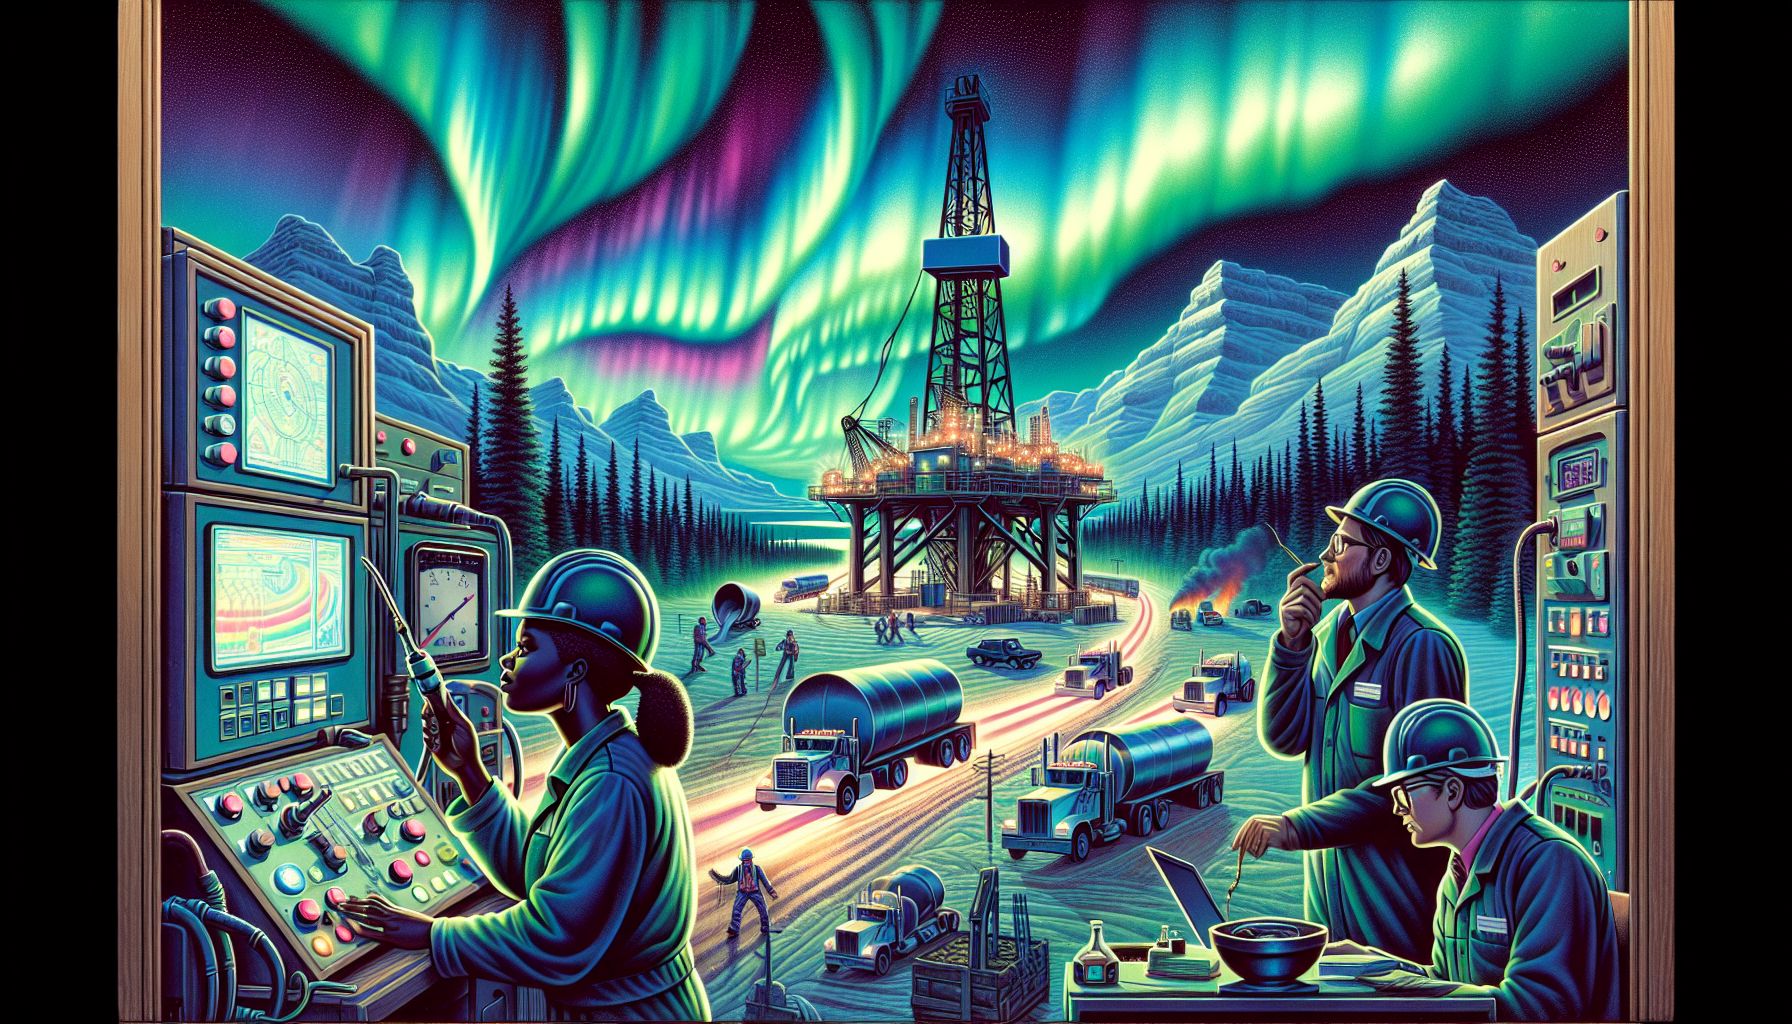 dzpilagswd - The Iridescent World of Canada's Oil & Gas Industry